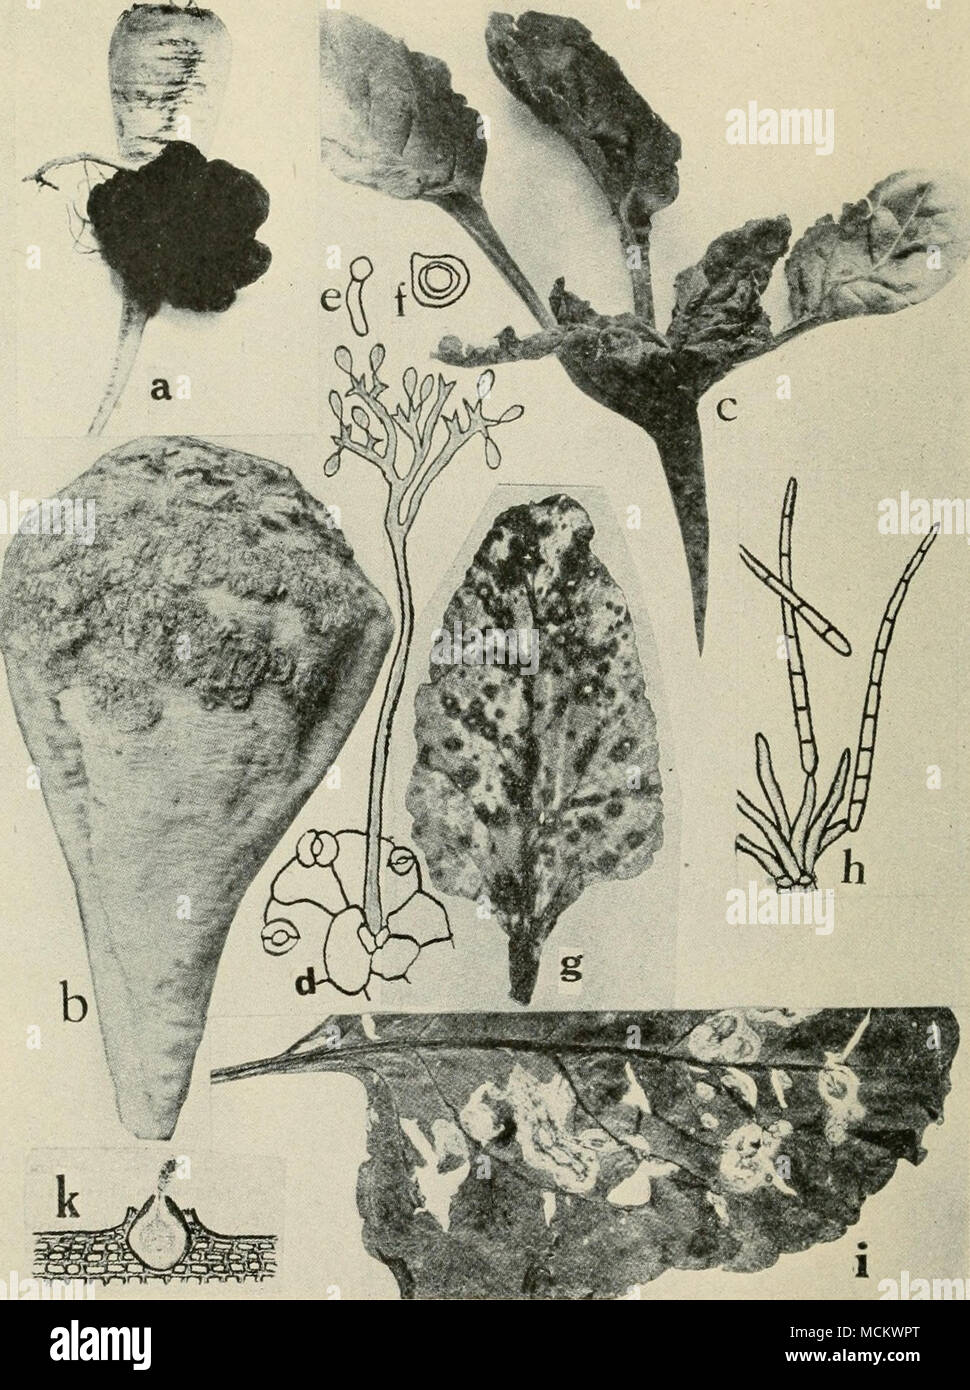 . Fig. 20. Beet Diseases. a. Crown gall, b. scab, c. downy mildew, d. Conidiophore of Pernnospora schachlii arising from a stomate of an infected beet leaf, e. germinating zoospore of P. schach- lii, f. oospore of P. schachlii, g. Cercospora leaf spot (after Halsted), h. conidiophore and conidia of Cercospora belt cola (after Duggar), i. Phoma leaf spot (after Pool and McKay), k. pycnidium of Phoma beta; (after T. Johnson) (J.-/, after PriUieux). Stock Photo